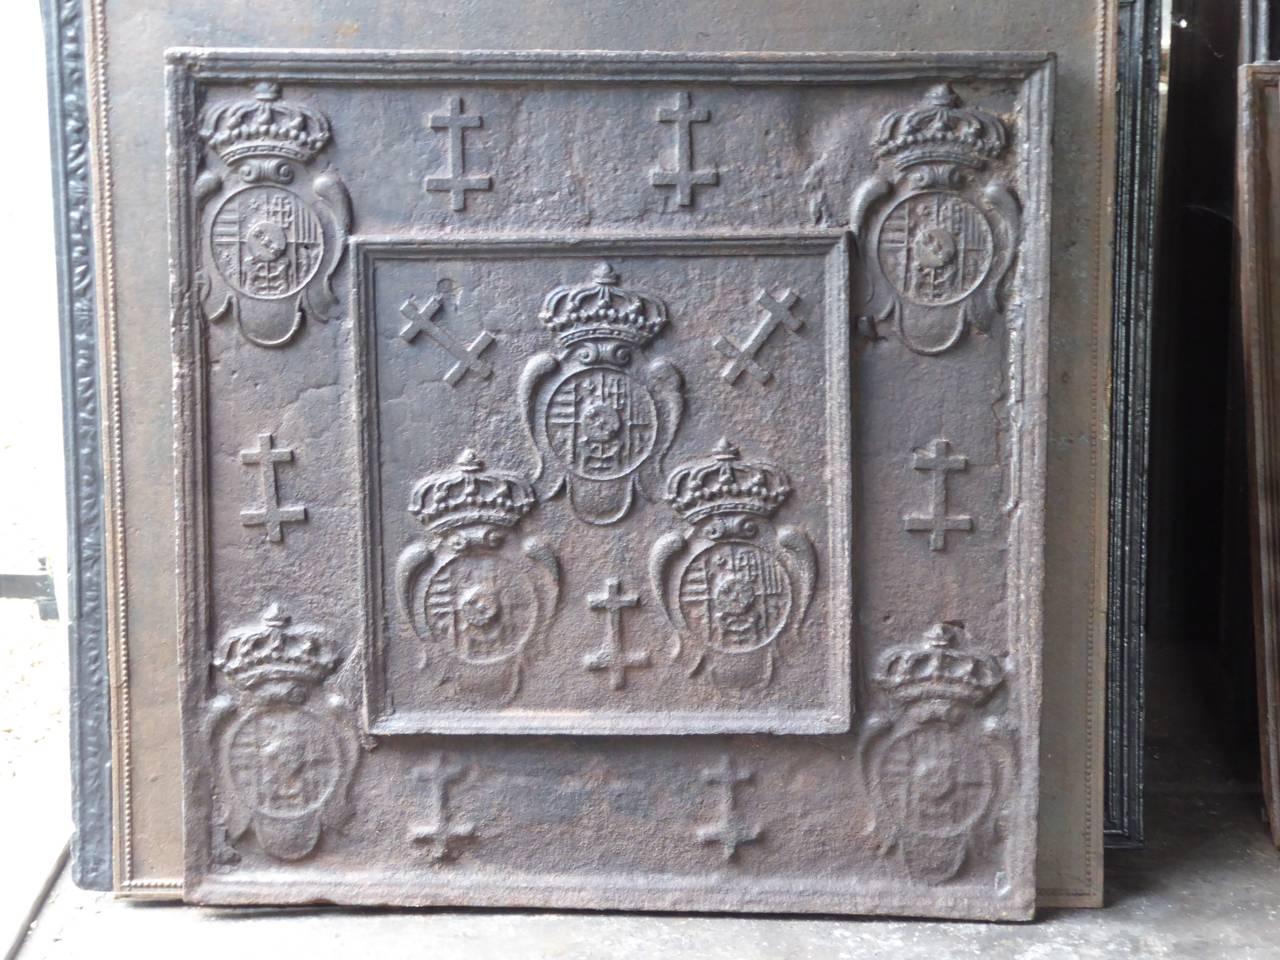 17th-18th century French fireback with the Arms of Lorraine. Seven shields with the arms of Leopold I, Duke of Lorraine and nine Lorraine crosses.

We have a unique and specialized collection of antique and used fireplace accessories consisting of